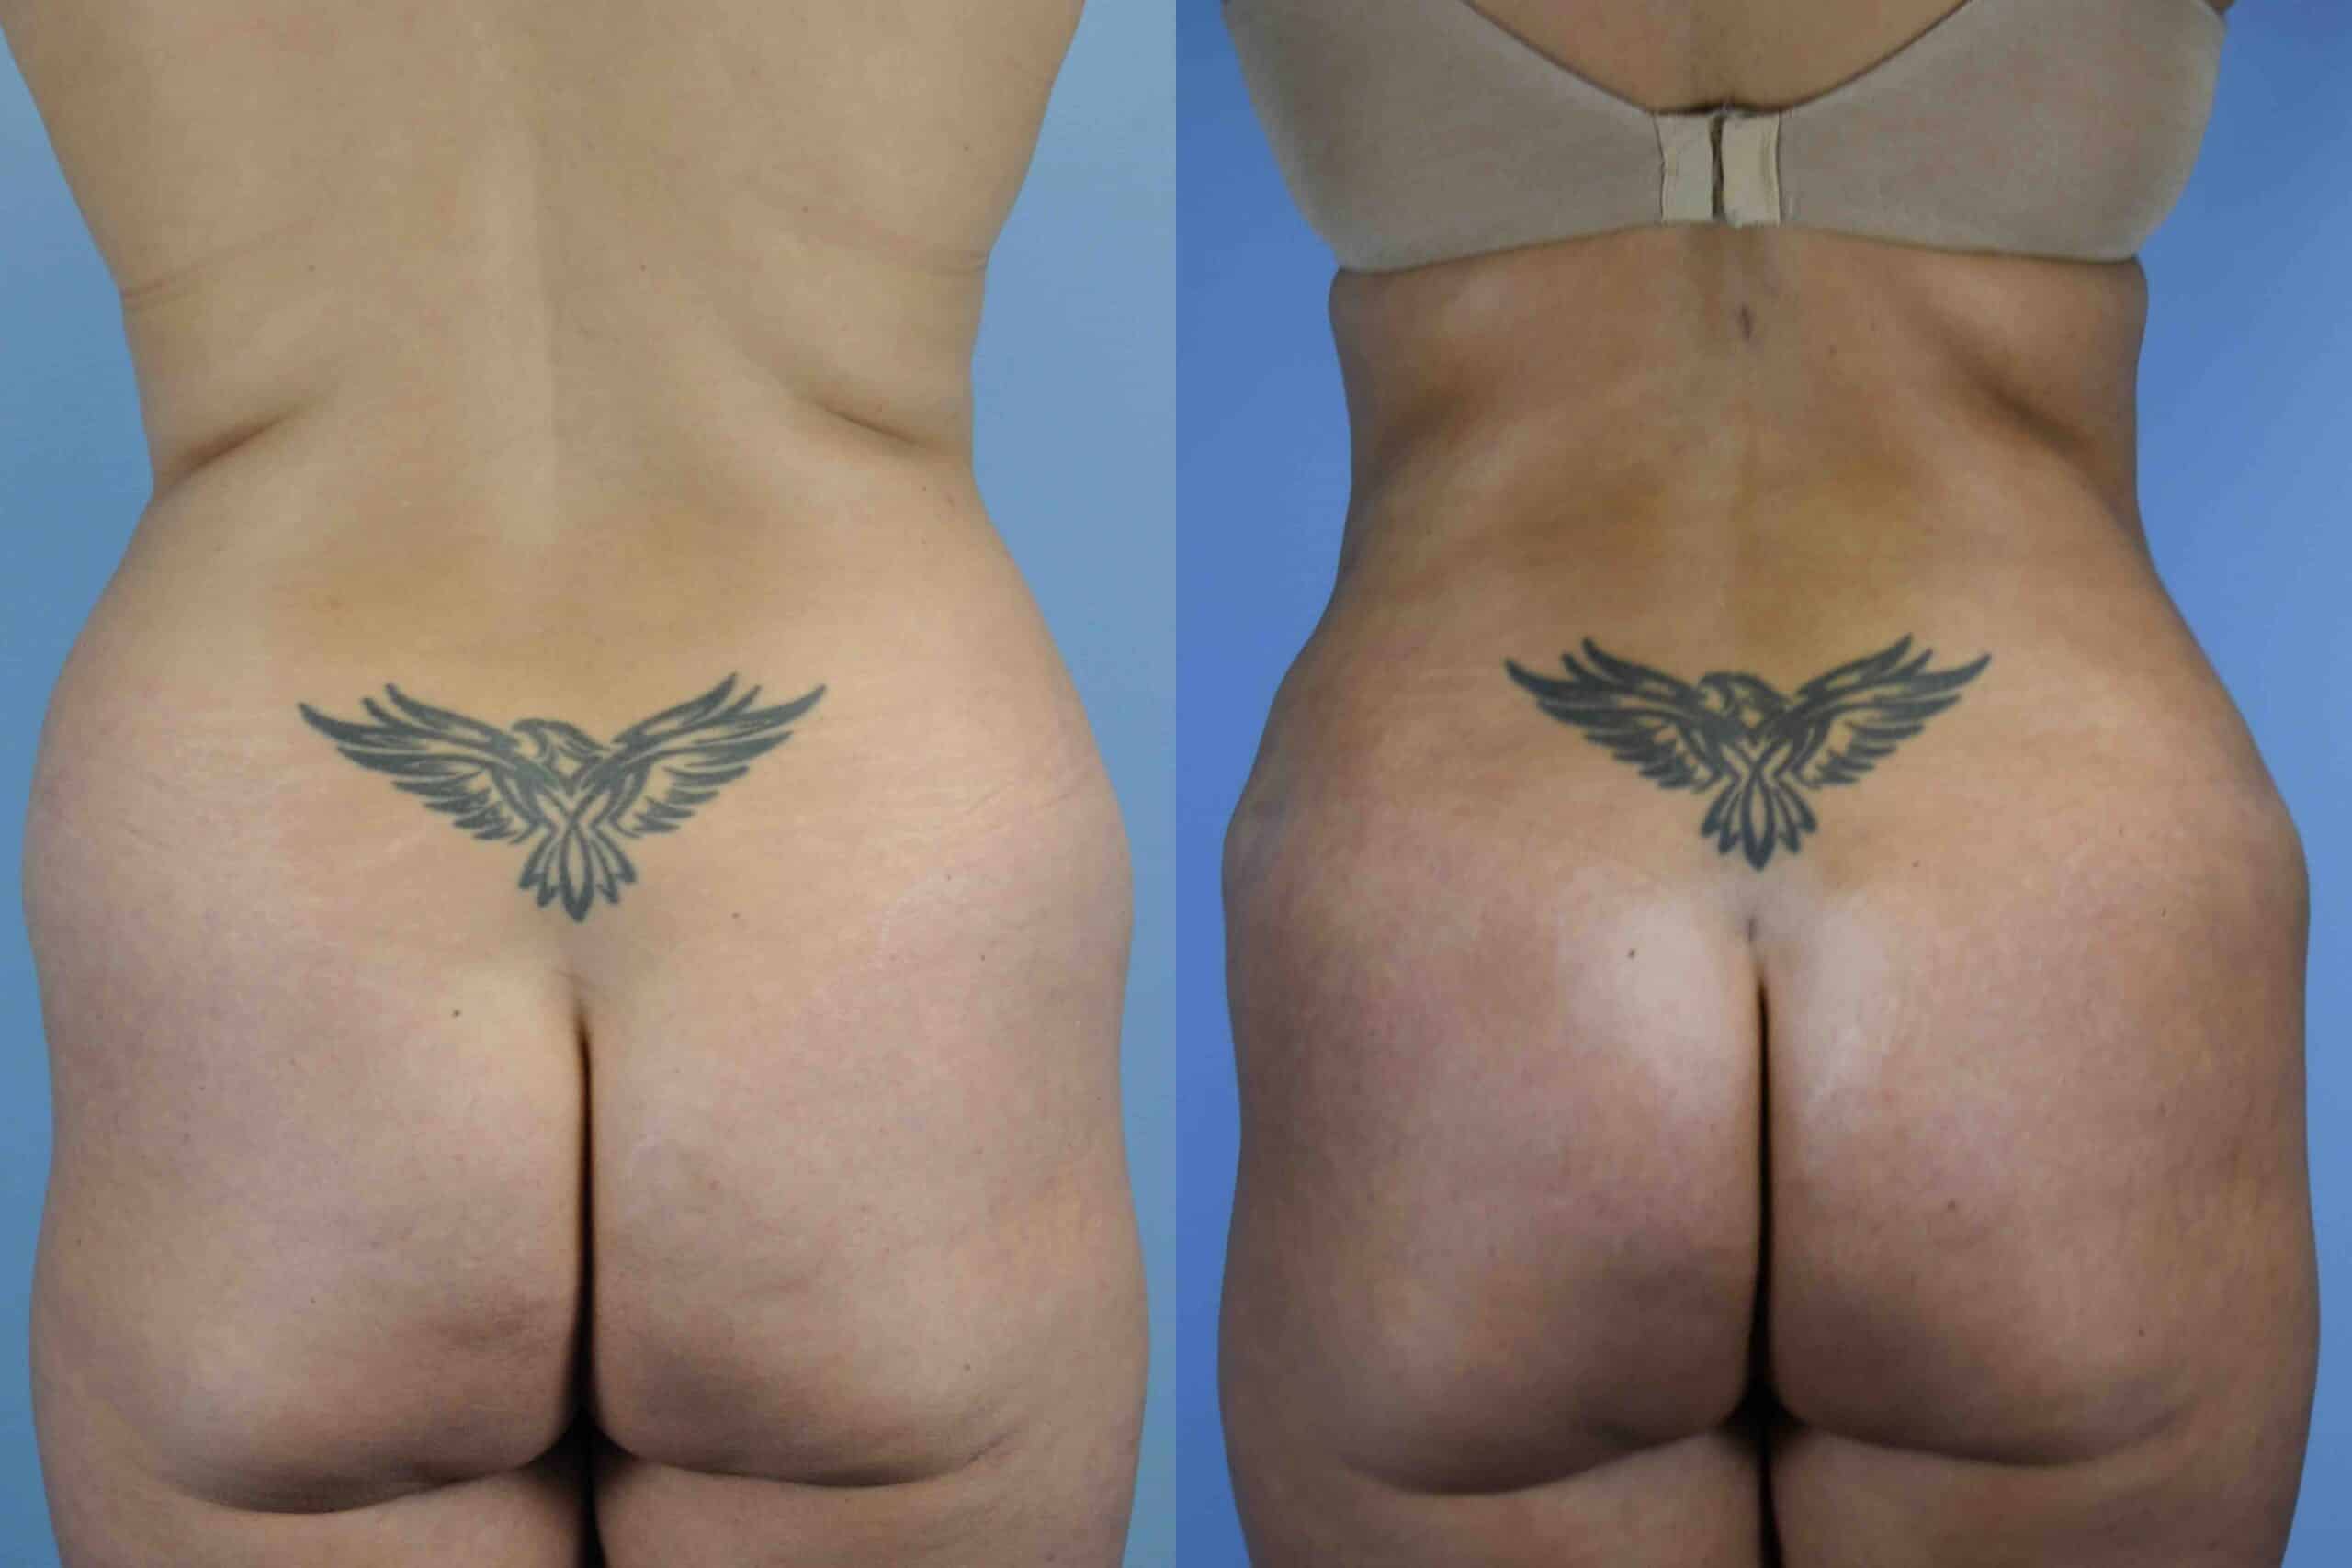 Before and after, patient 6 mo post op from Renuvion Abdomen and Flanks, VASER Abdomen and Flanks,Tummy Tuck with Hernia Repair procedures performed by Dr. Paul Vanek